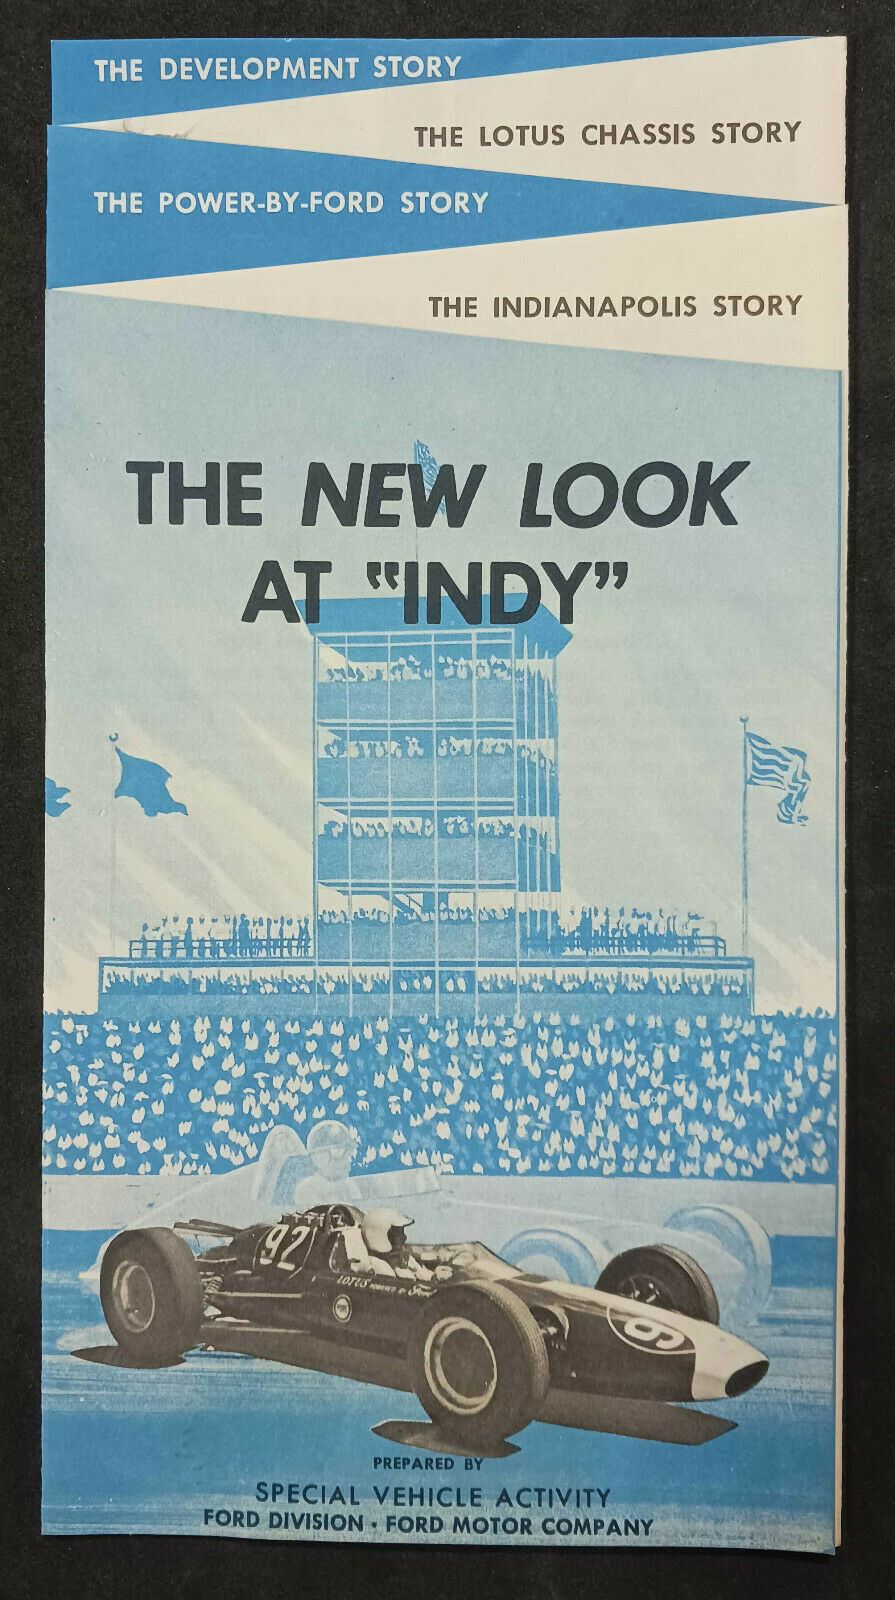 1963 Ford Lotus Indy Indianapolis 500 Pamphlet